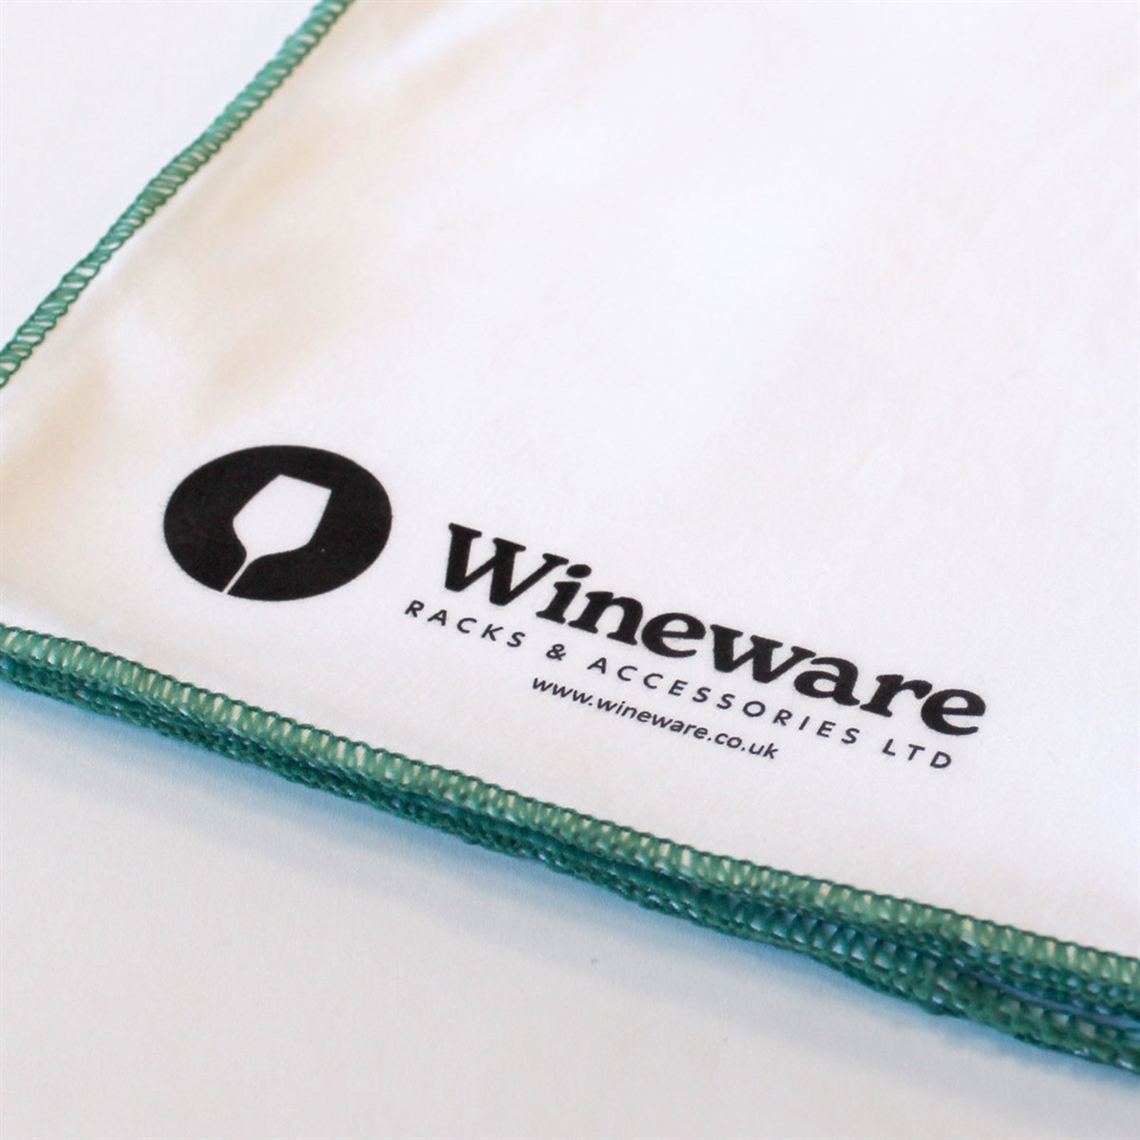 View more wine glasses from our Wine Glass Cleaning & Accessories range